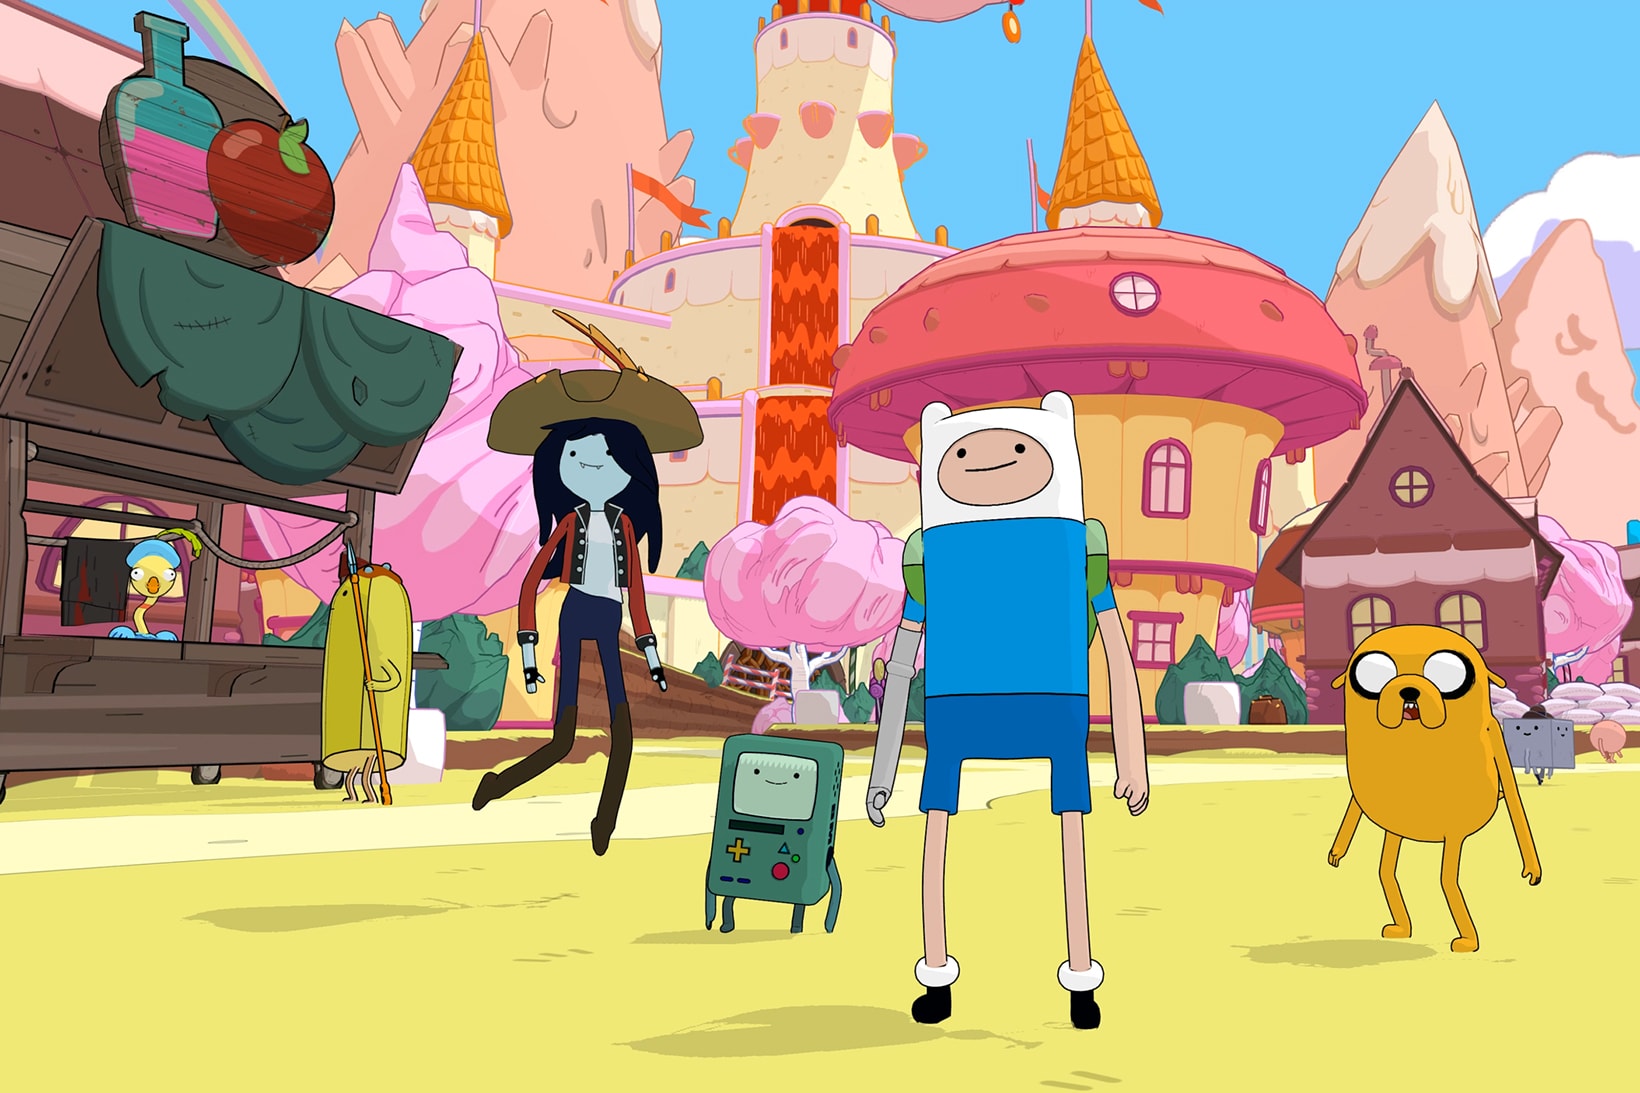 Adventure Time Video Game PC Xbox One PS4 Bandai Namco Outright Games Adventure Time: Pirates of the Enchiridion